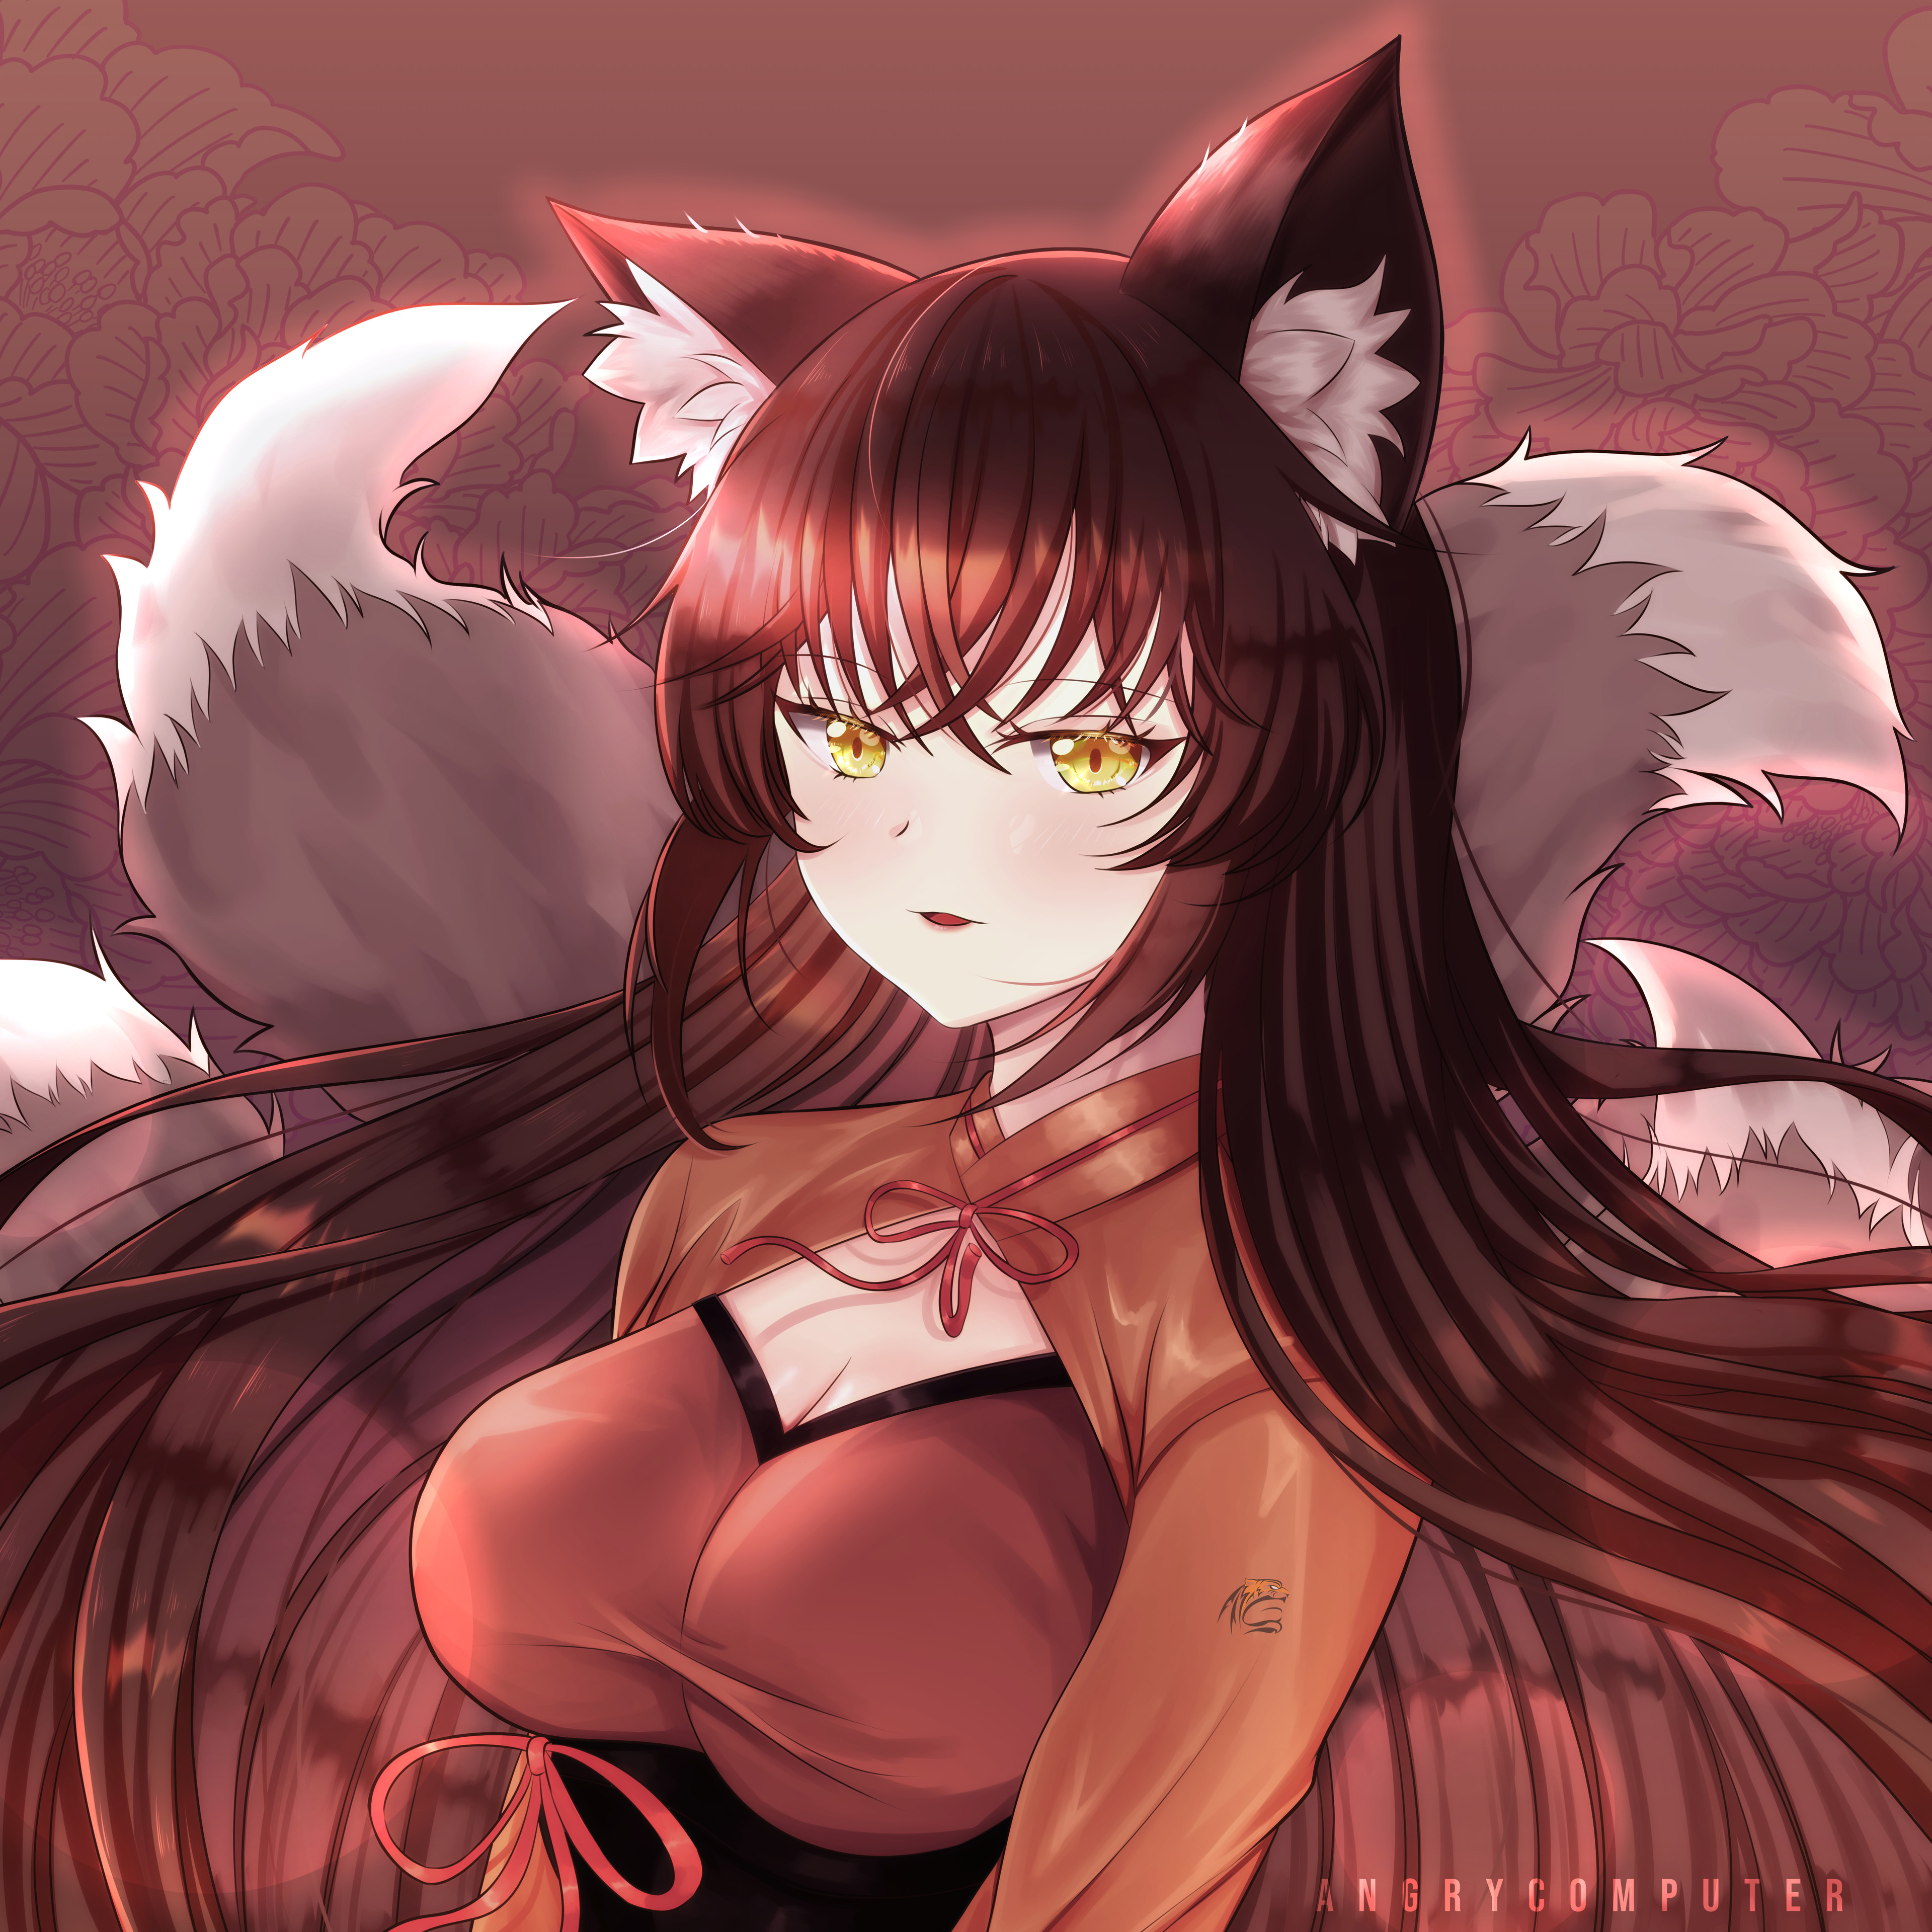 9 Tailed Kitsune – Get Your Daily Dose of Quality Anime Content